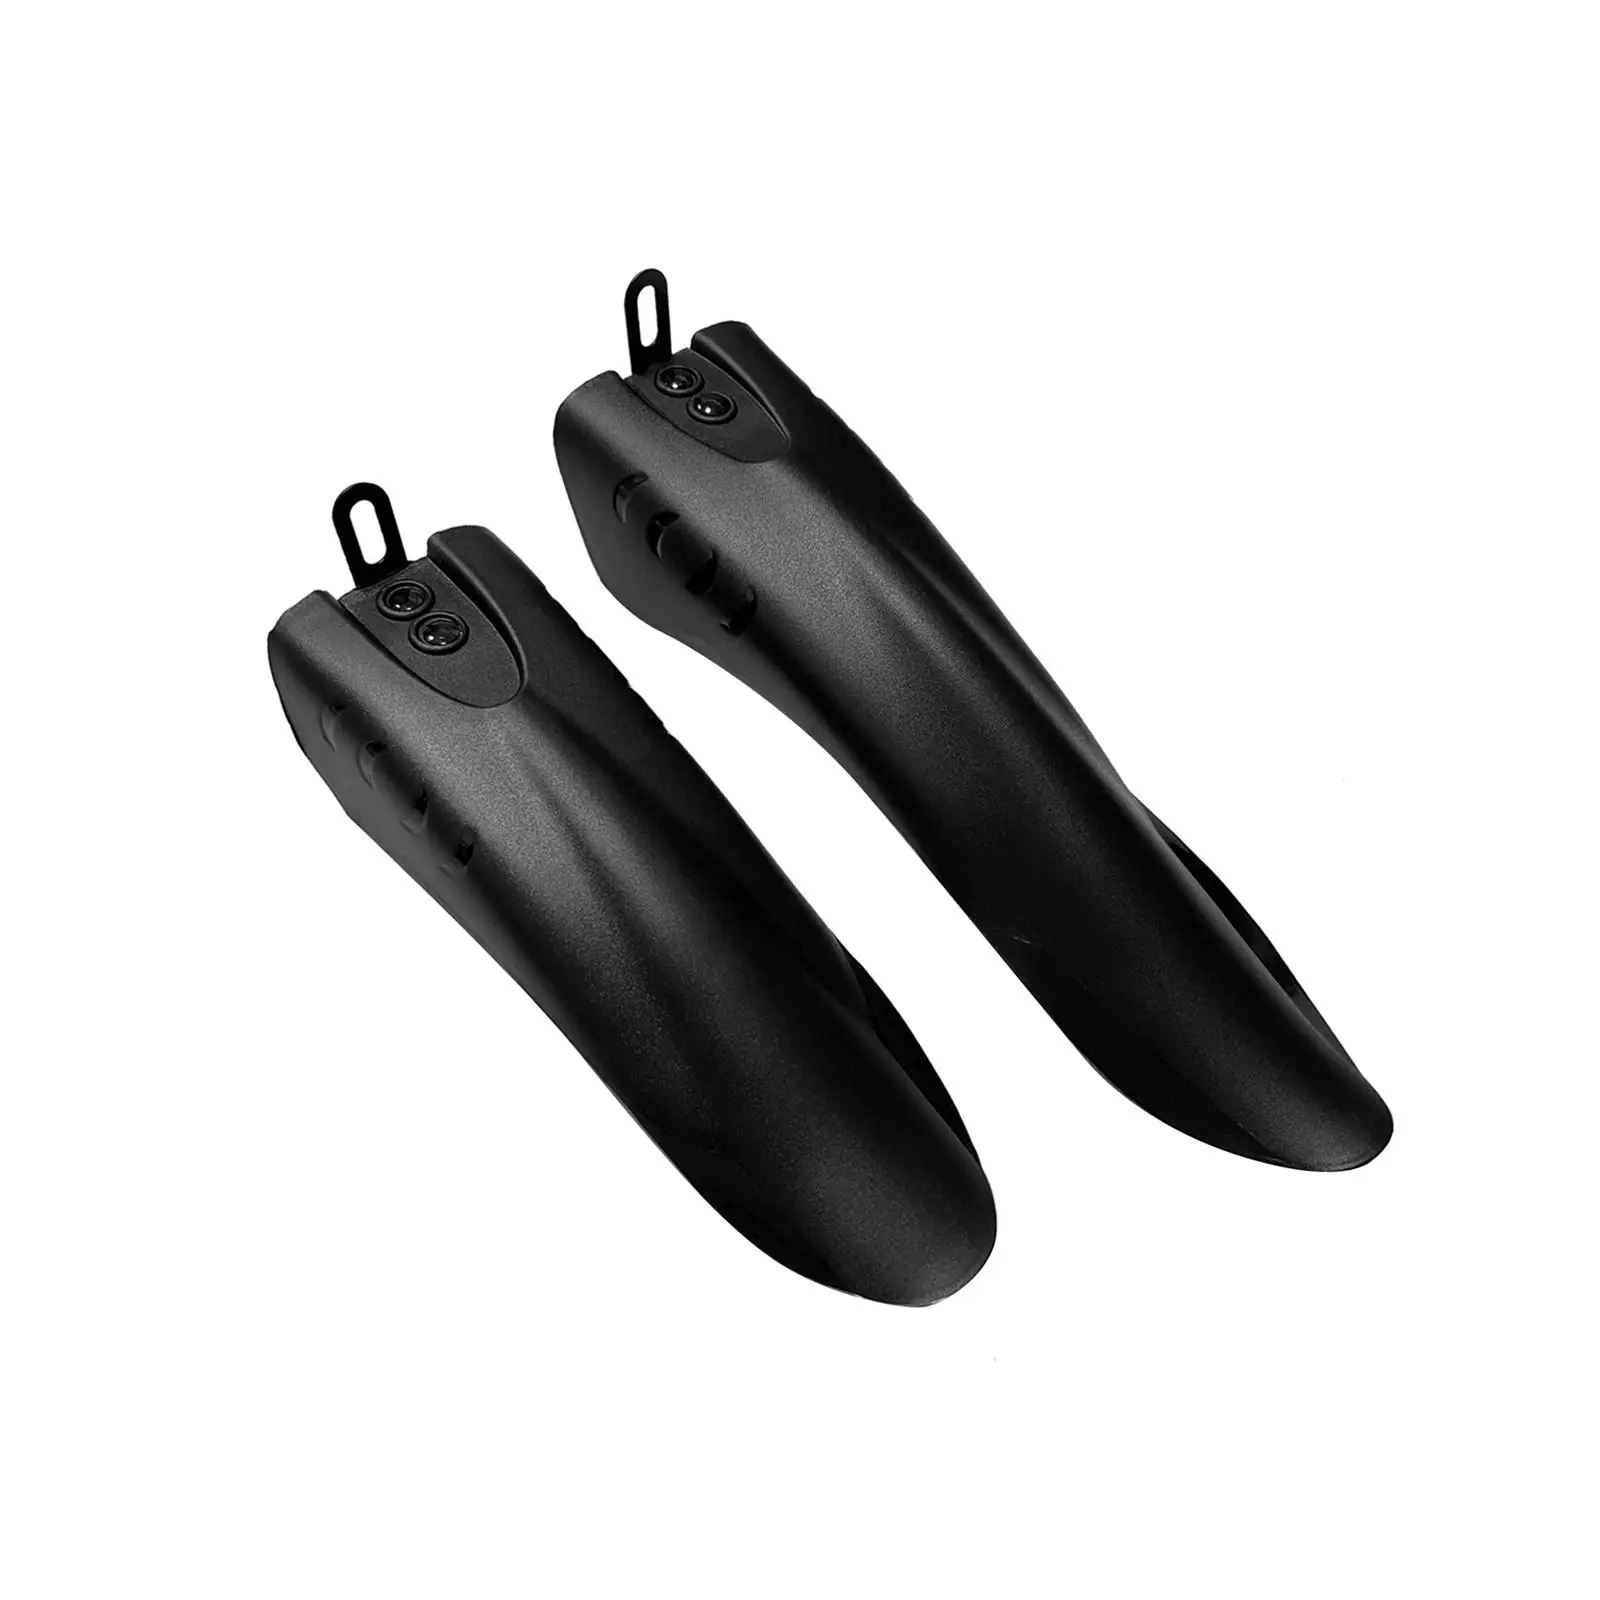 Mountain Bike Mudguard Set Mudflap Lightweight Replaces Easy to Install Fenders Mud Guard for Sports Mountain Bike